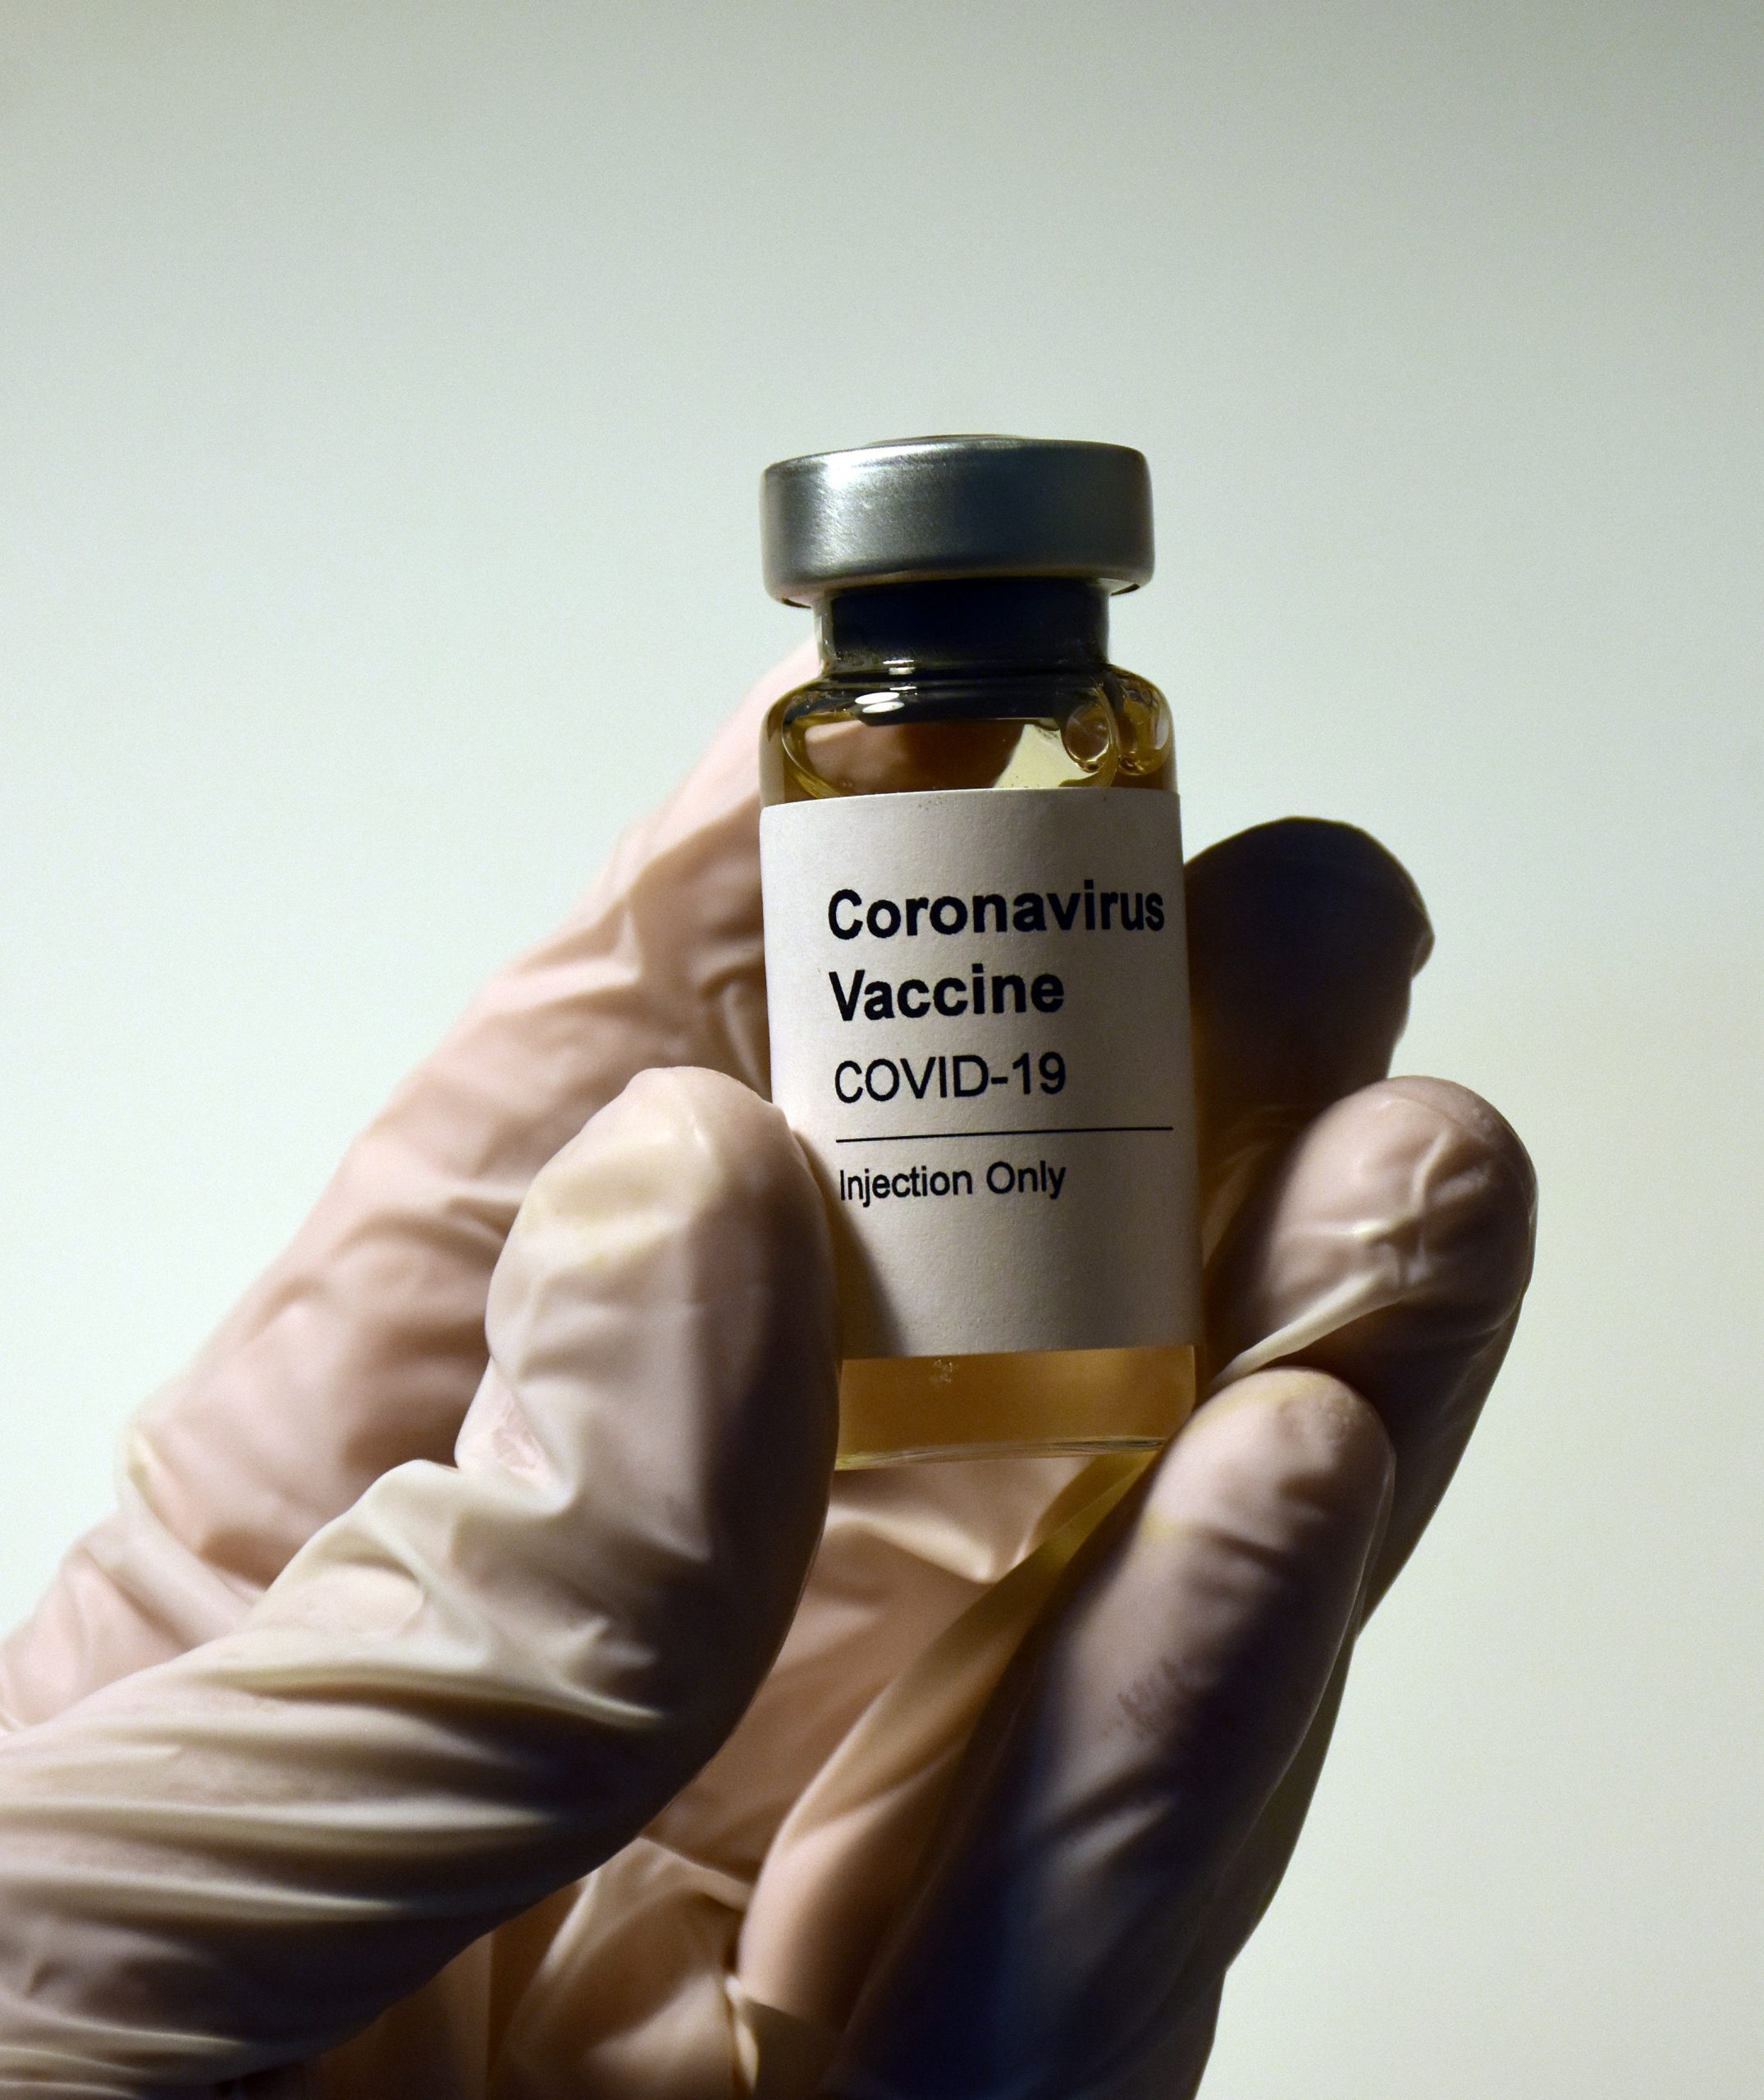 We resumed Covid-19 vaccination – update